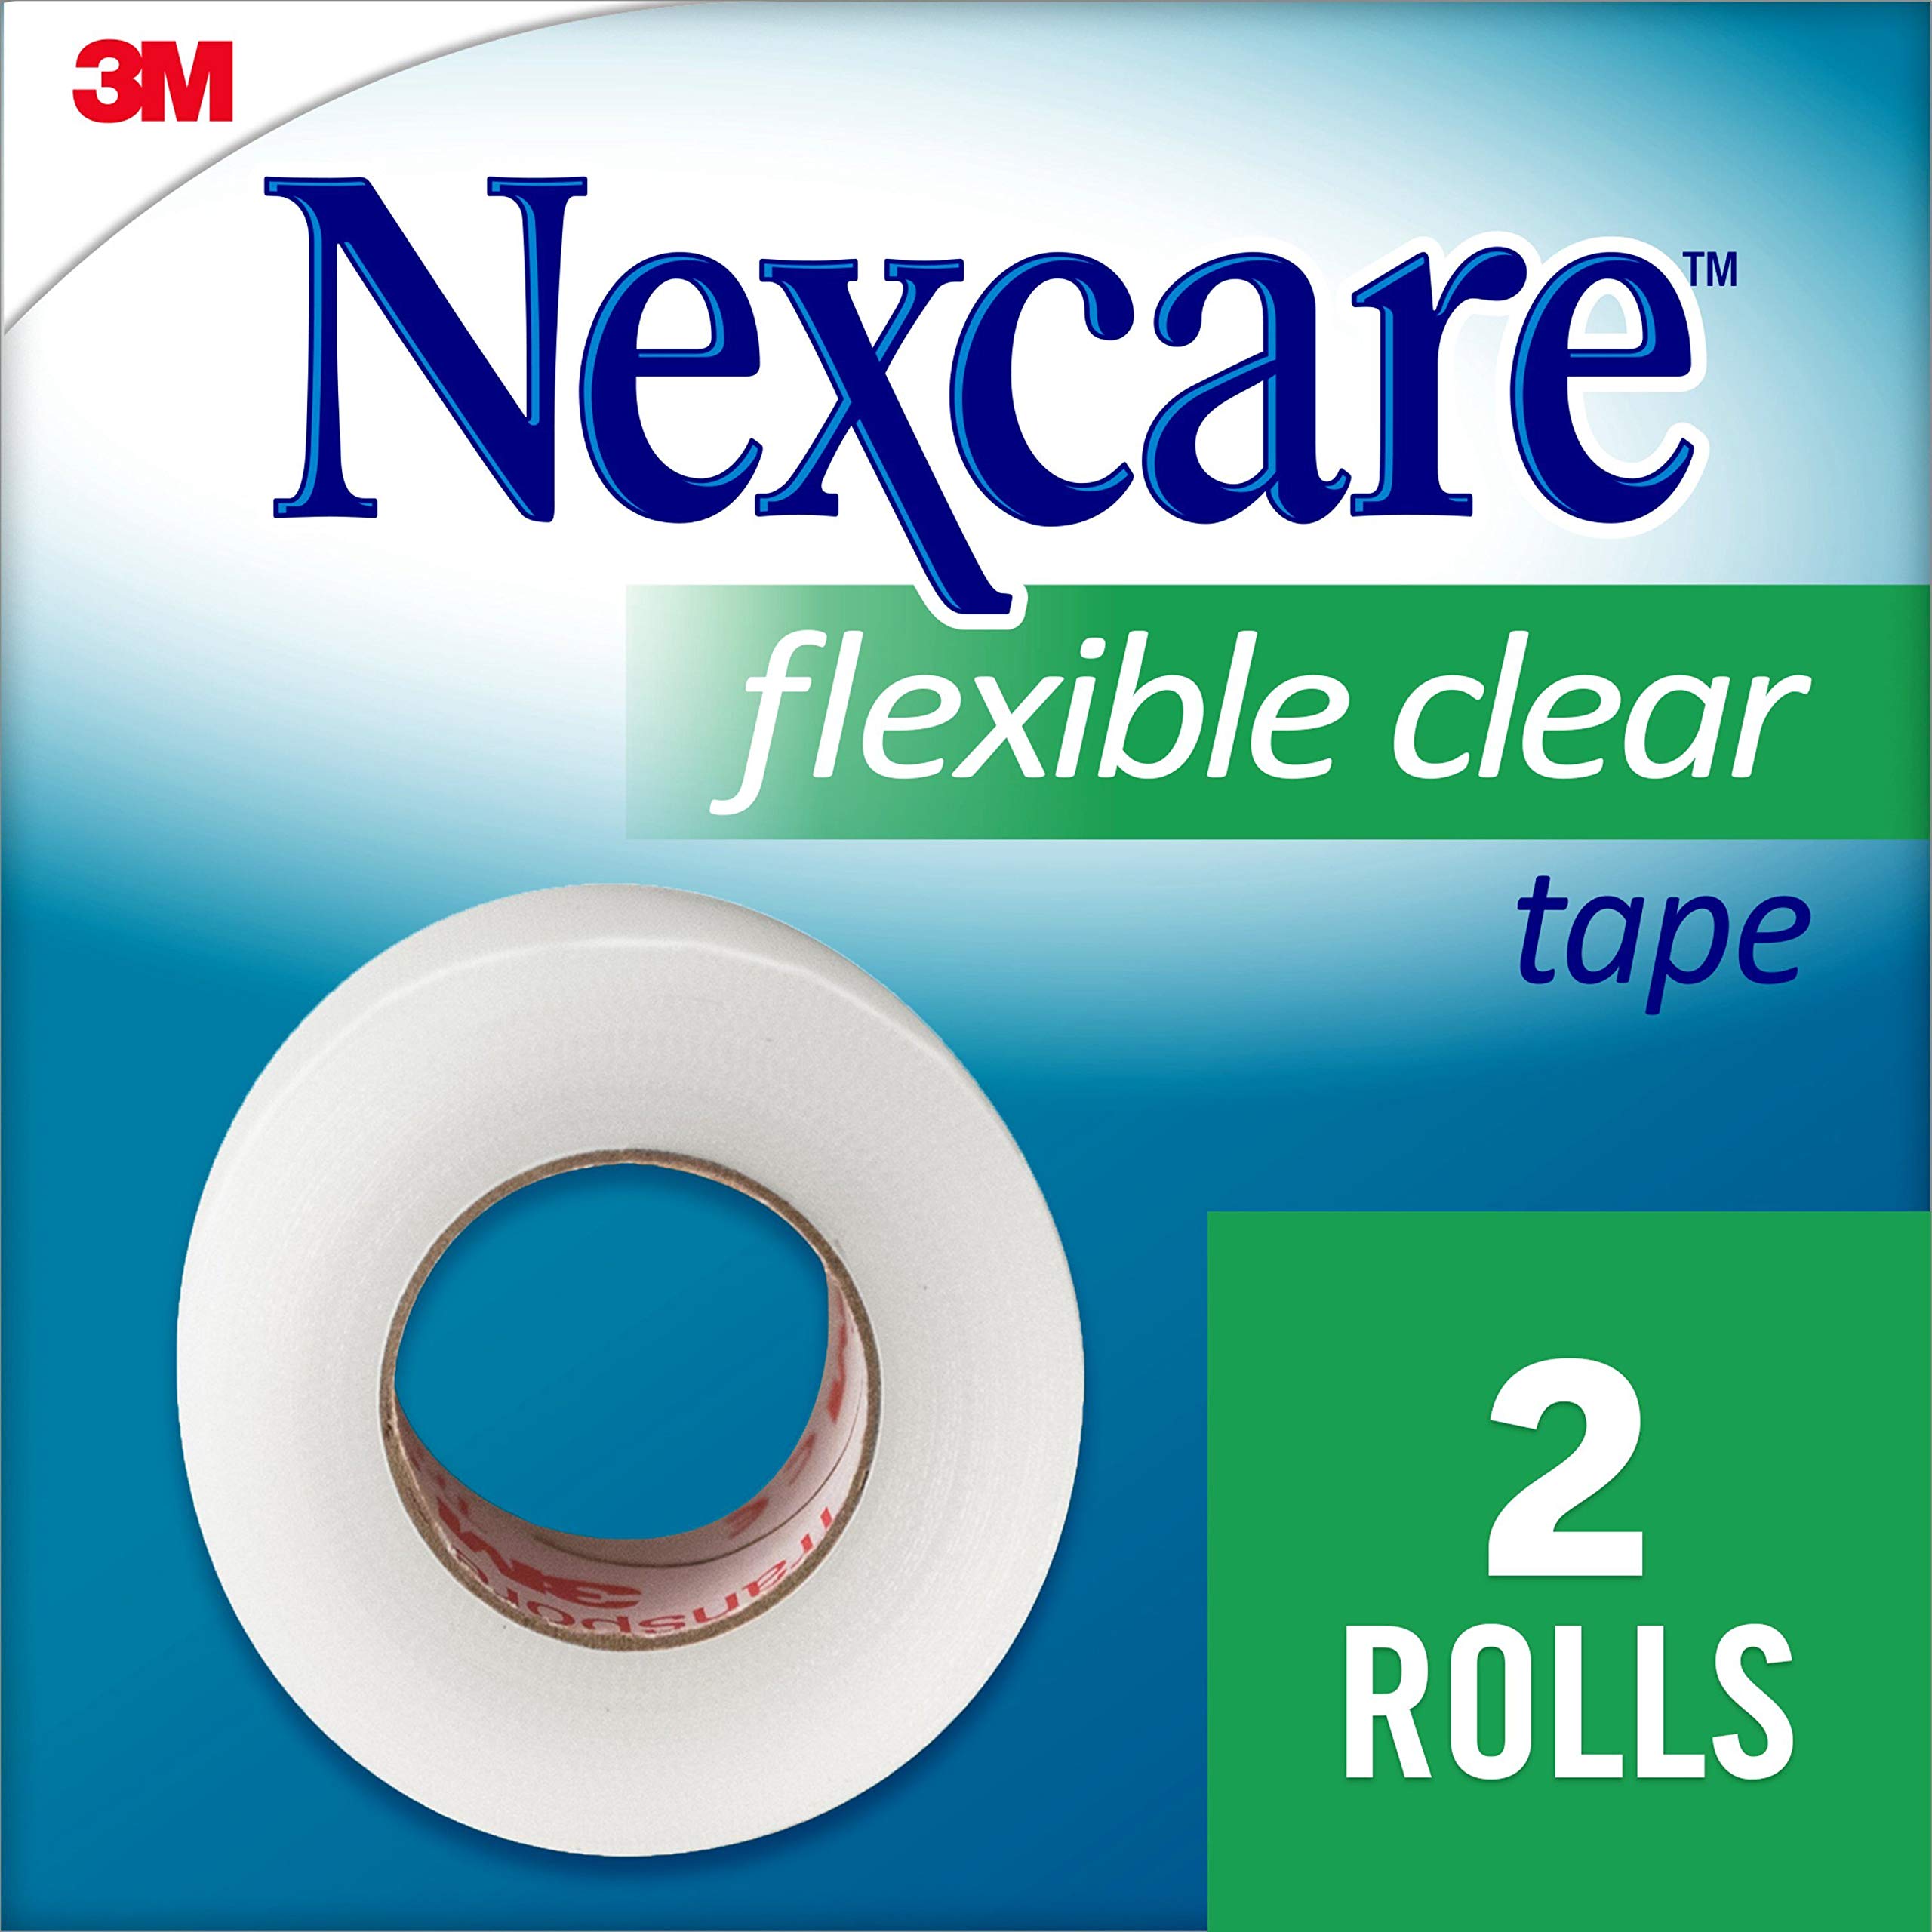 Nexcare Flexible Clear Tape, Tough, It’s clear, Stretchy Design Conforms To Hard To Tape Areas, 1-Inch X 10-Yards (Pack of 2)